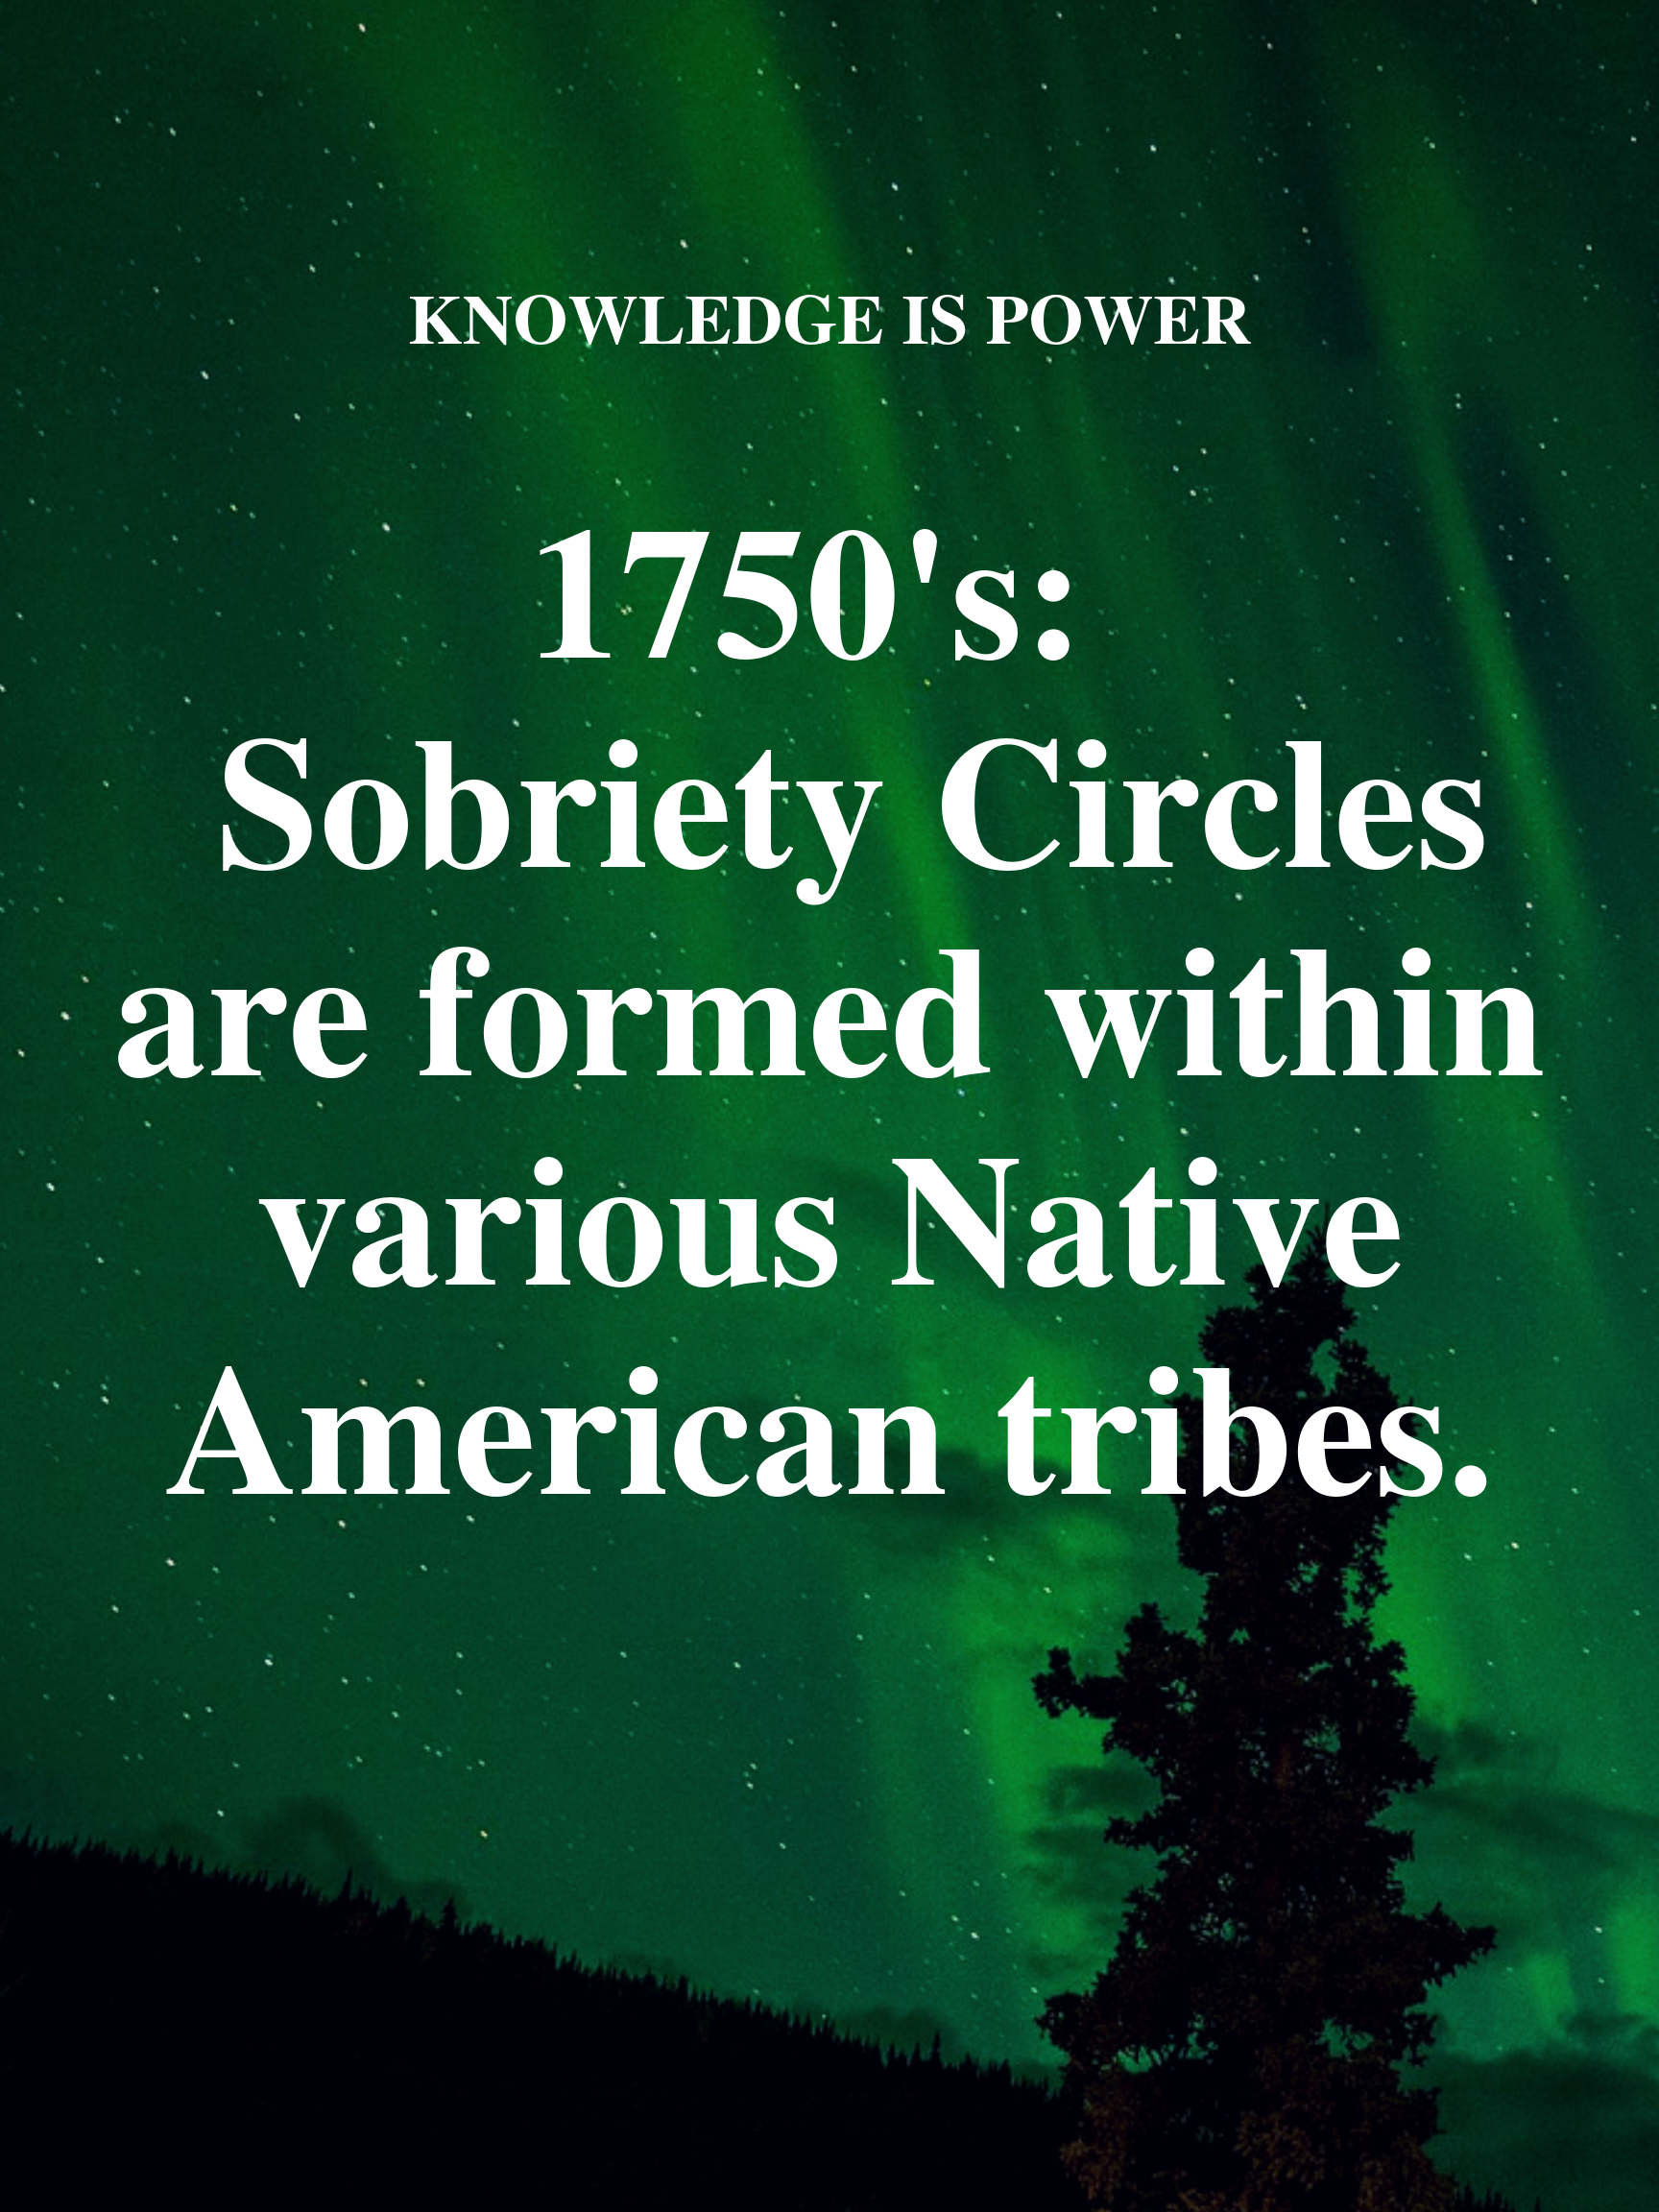 1750's_ Sobriety Circles are formed within various Native American tribes.